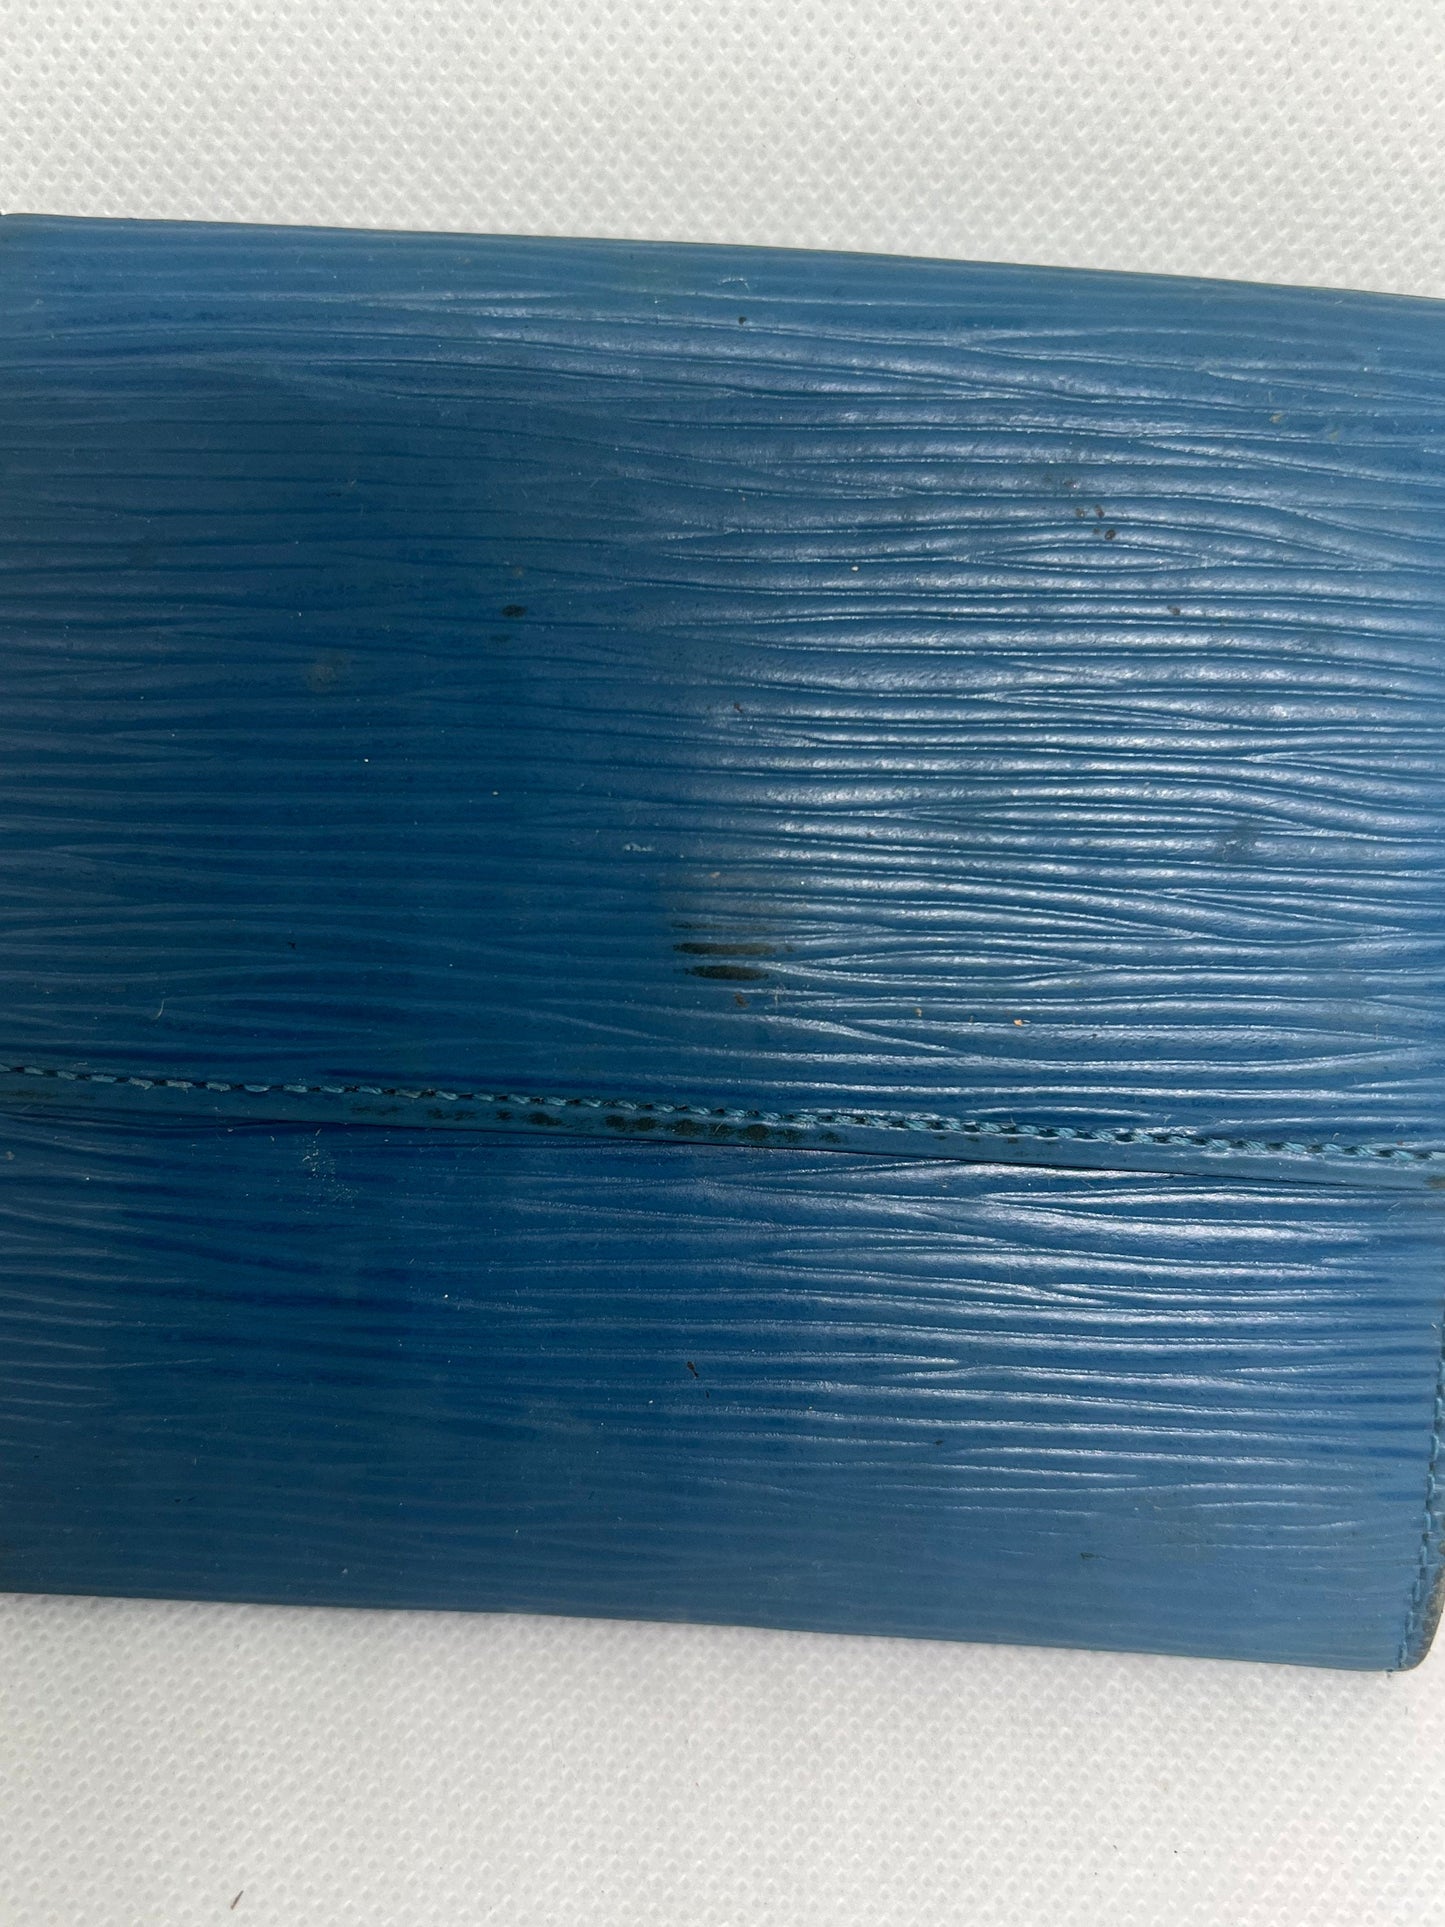 Louis Vuitton made in France blue wallet11”x10”